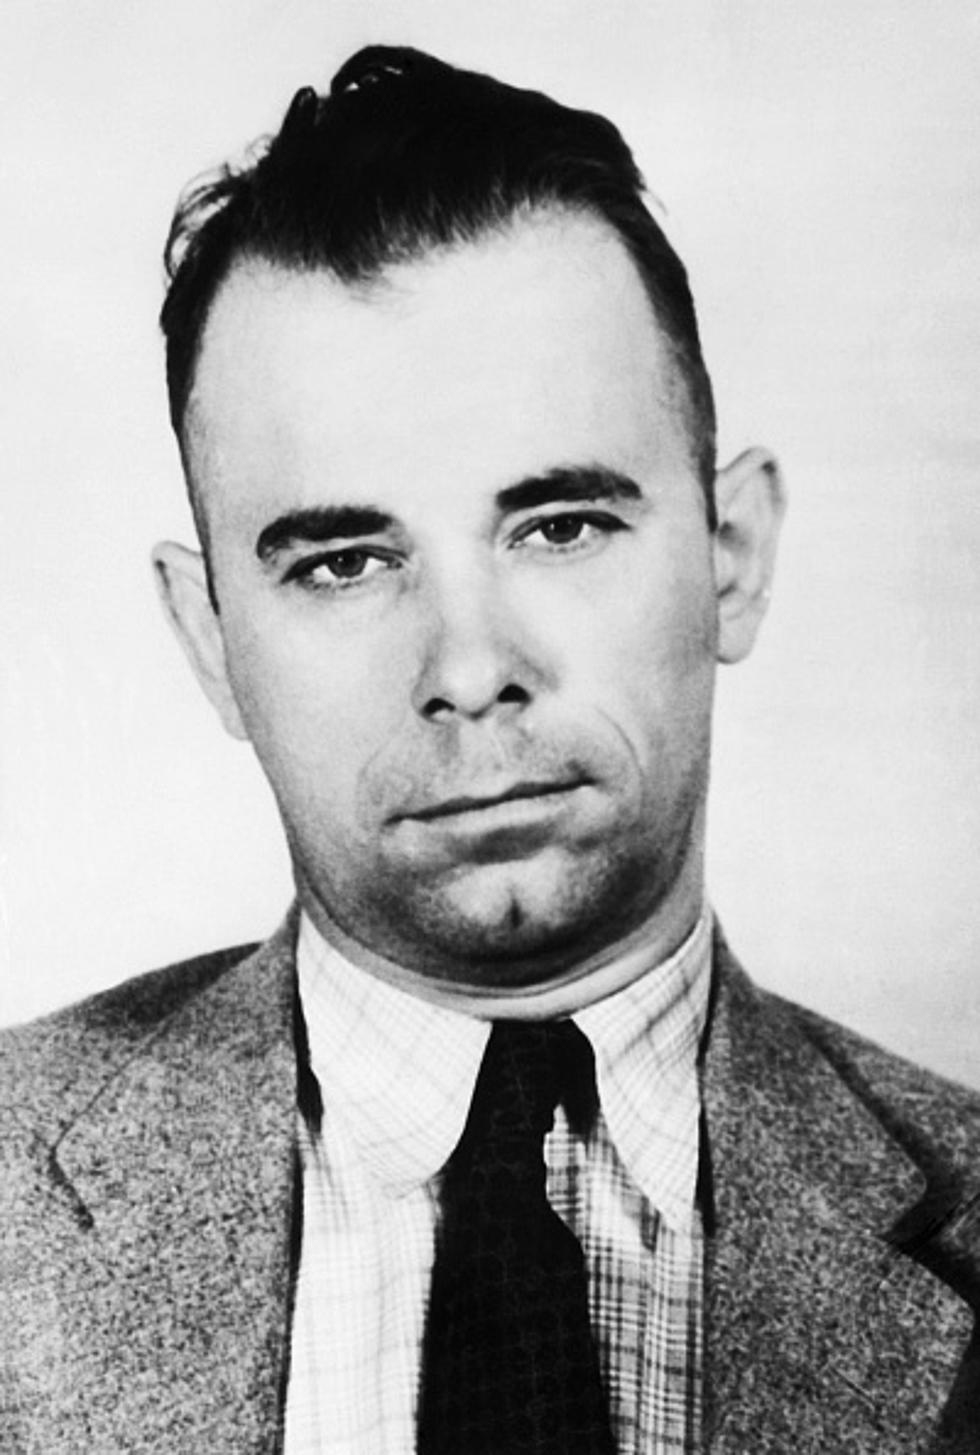 Indiana Is Going To Exhume John Dillinger's Body